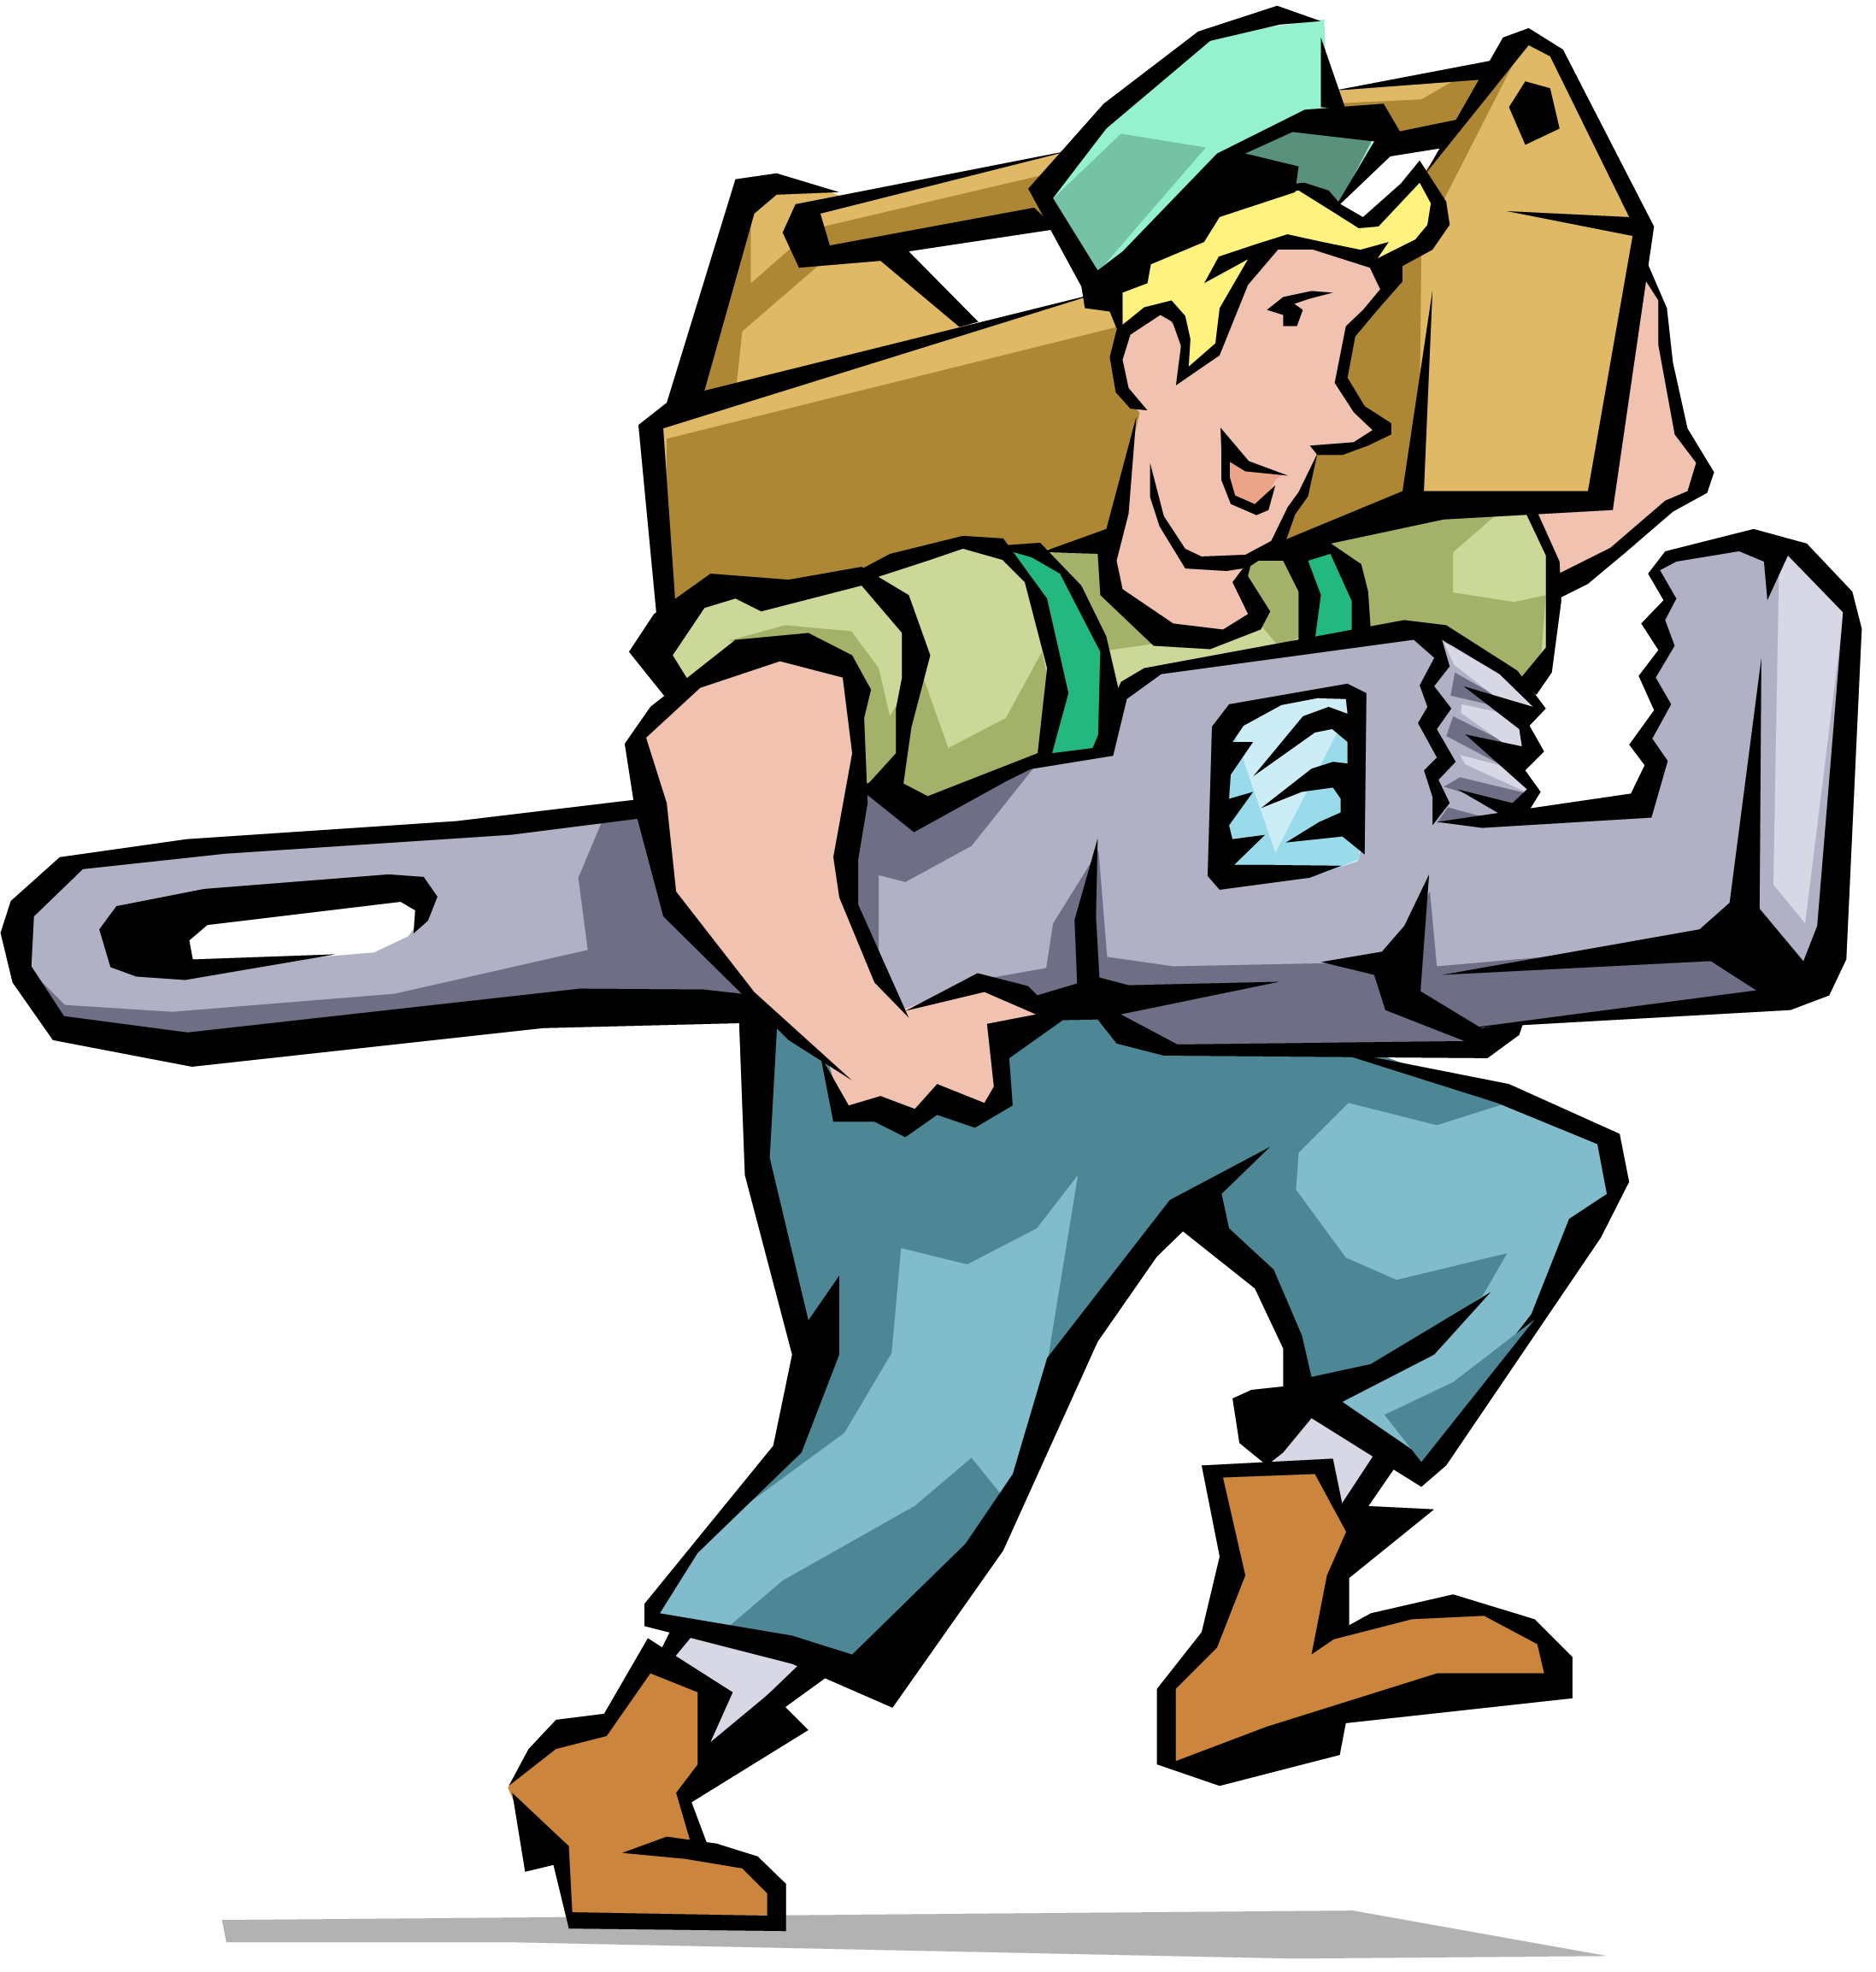 Handyman free download clip art on clipart library.